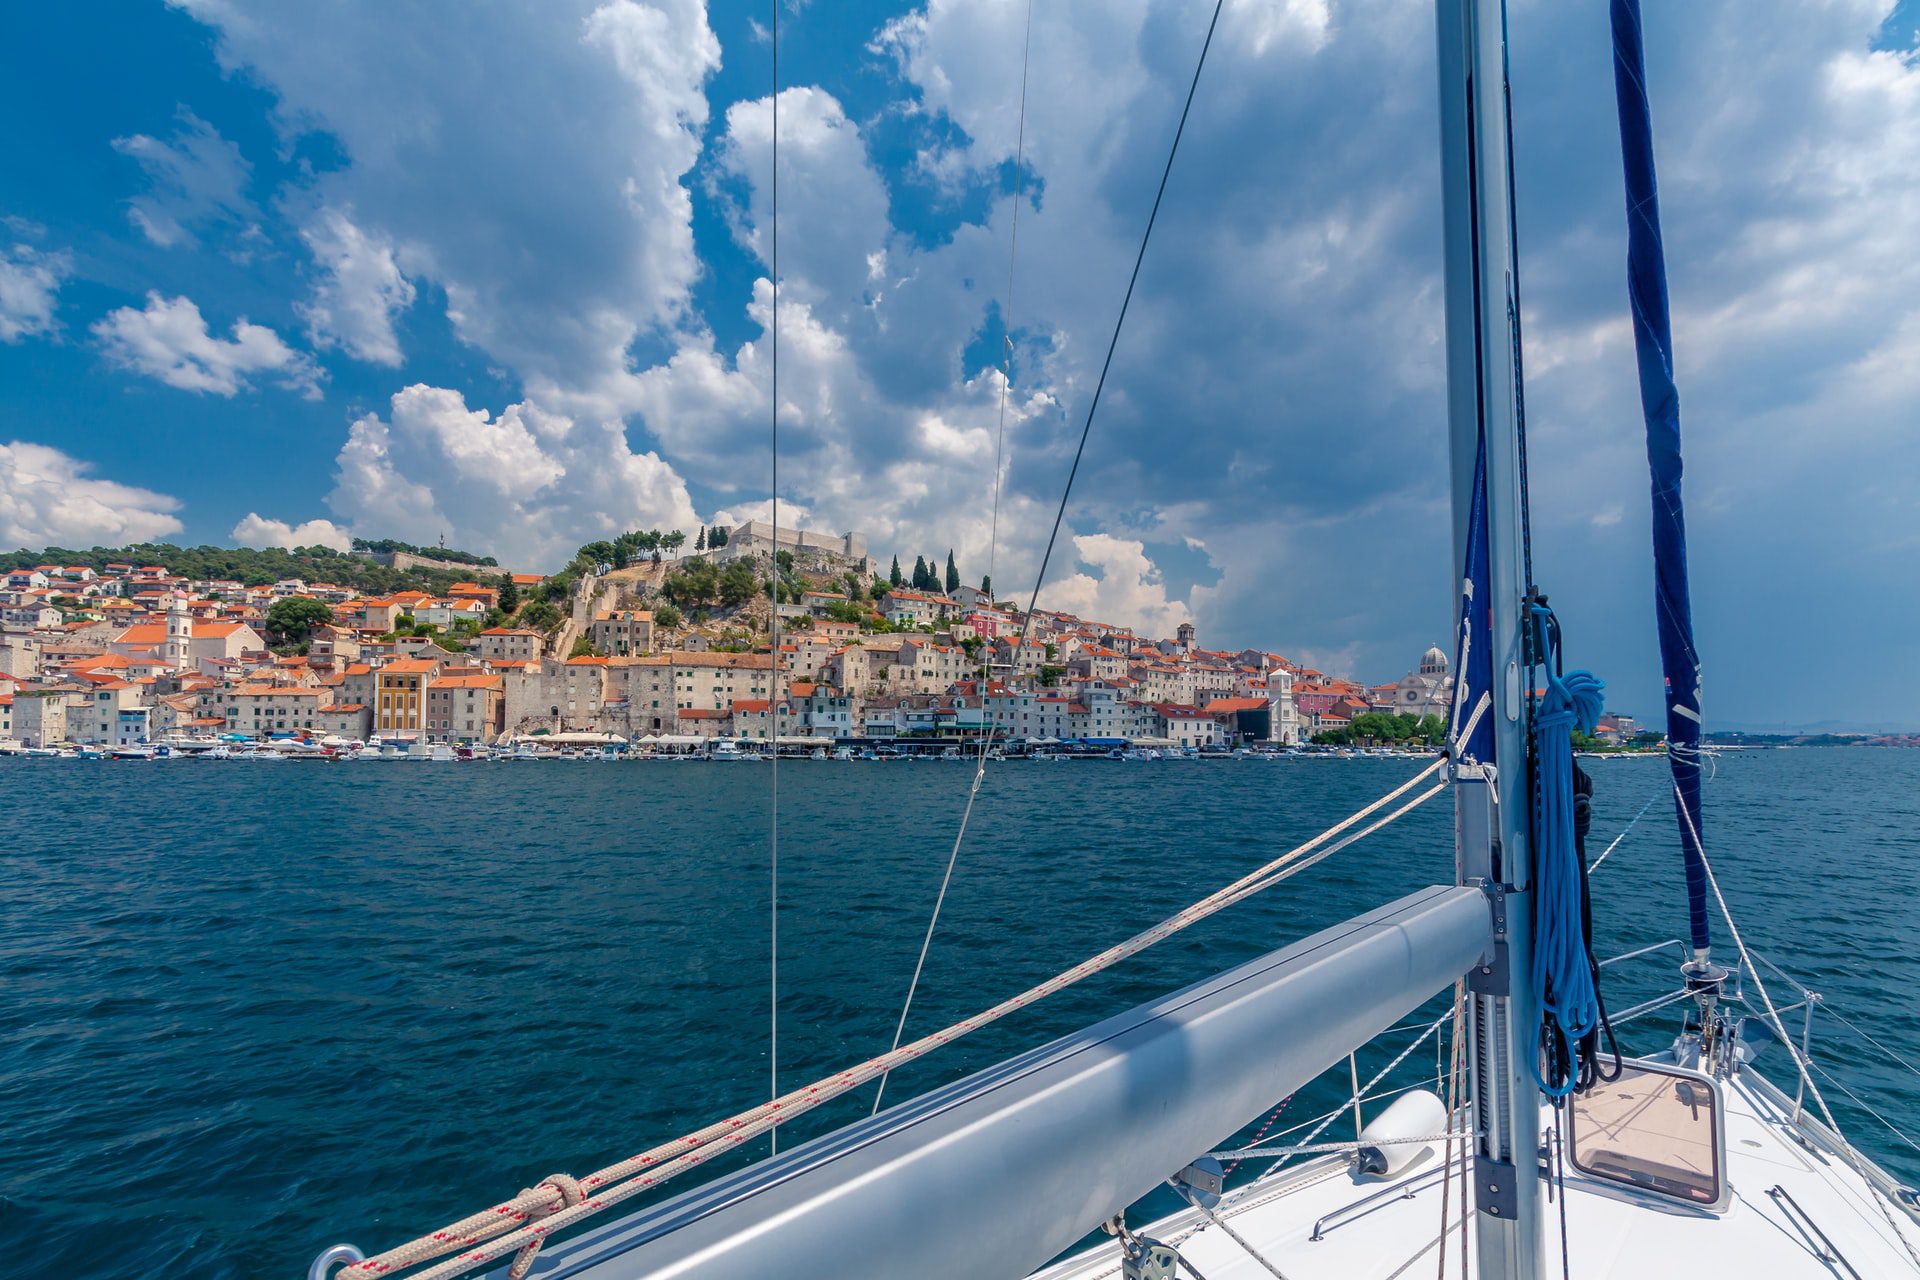 Sibenik in Croatia. Yachting holidays make up a big chunk of the county's tourism.